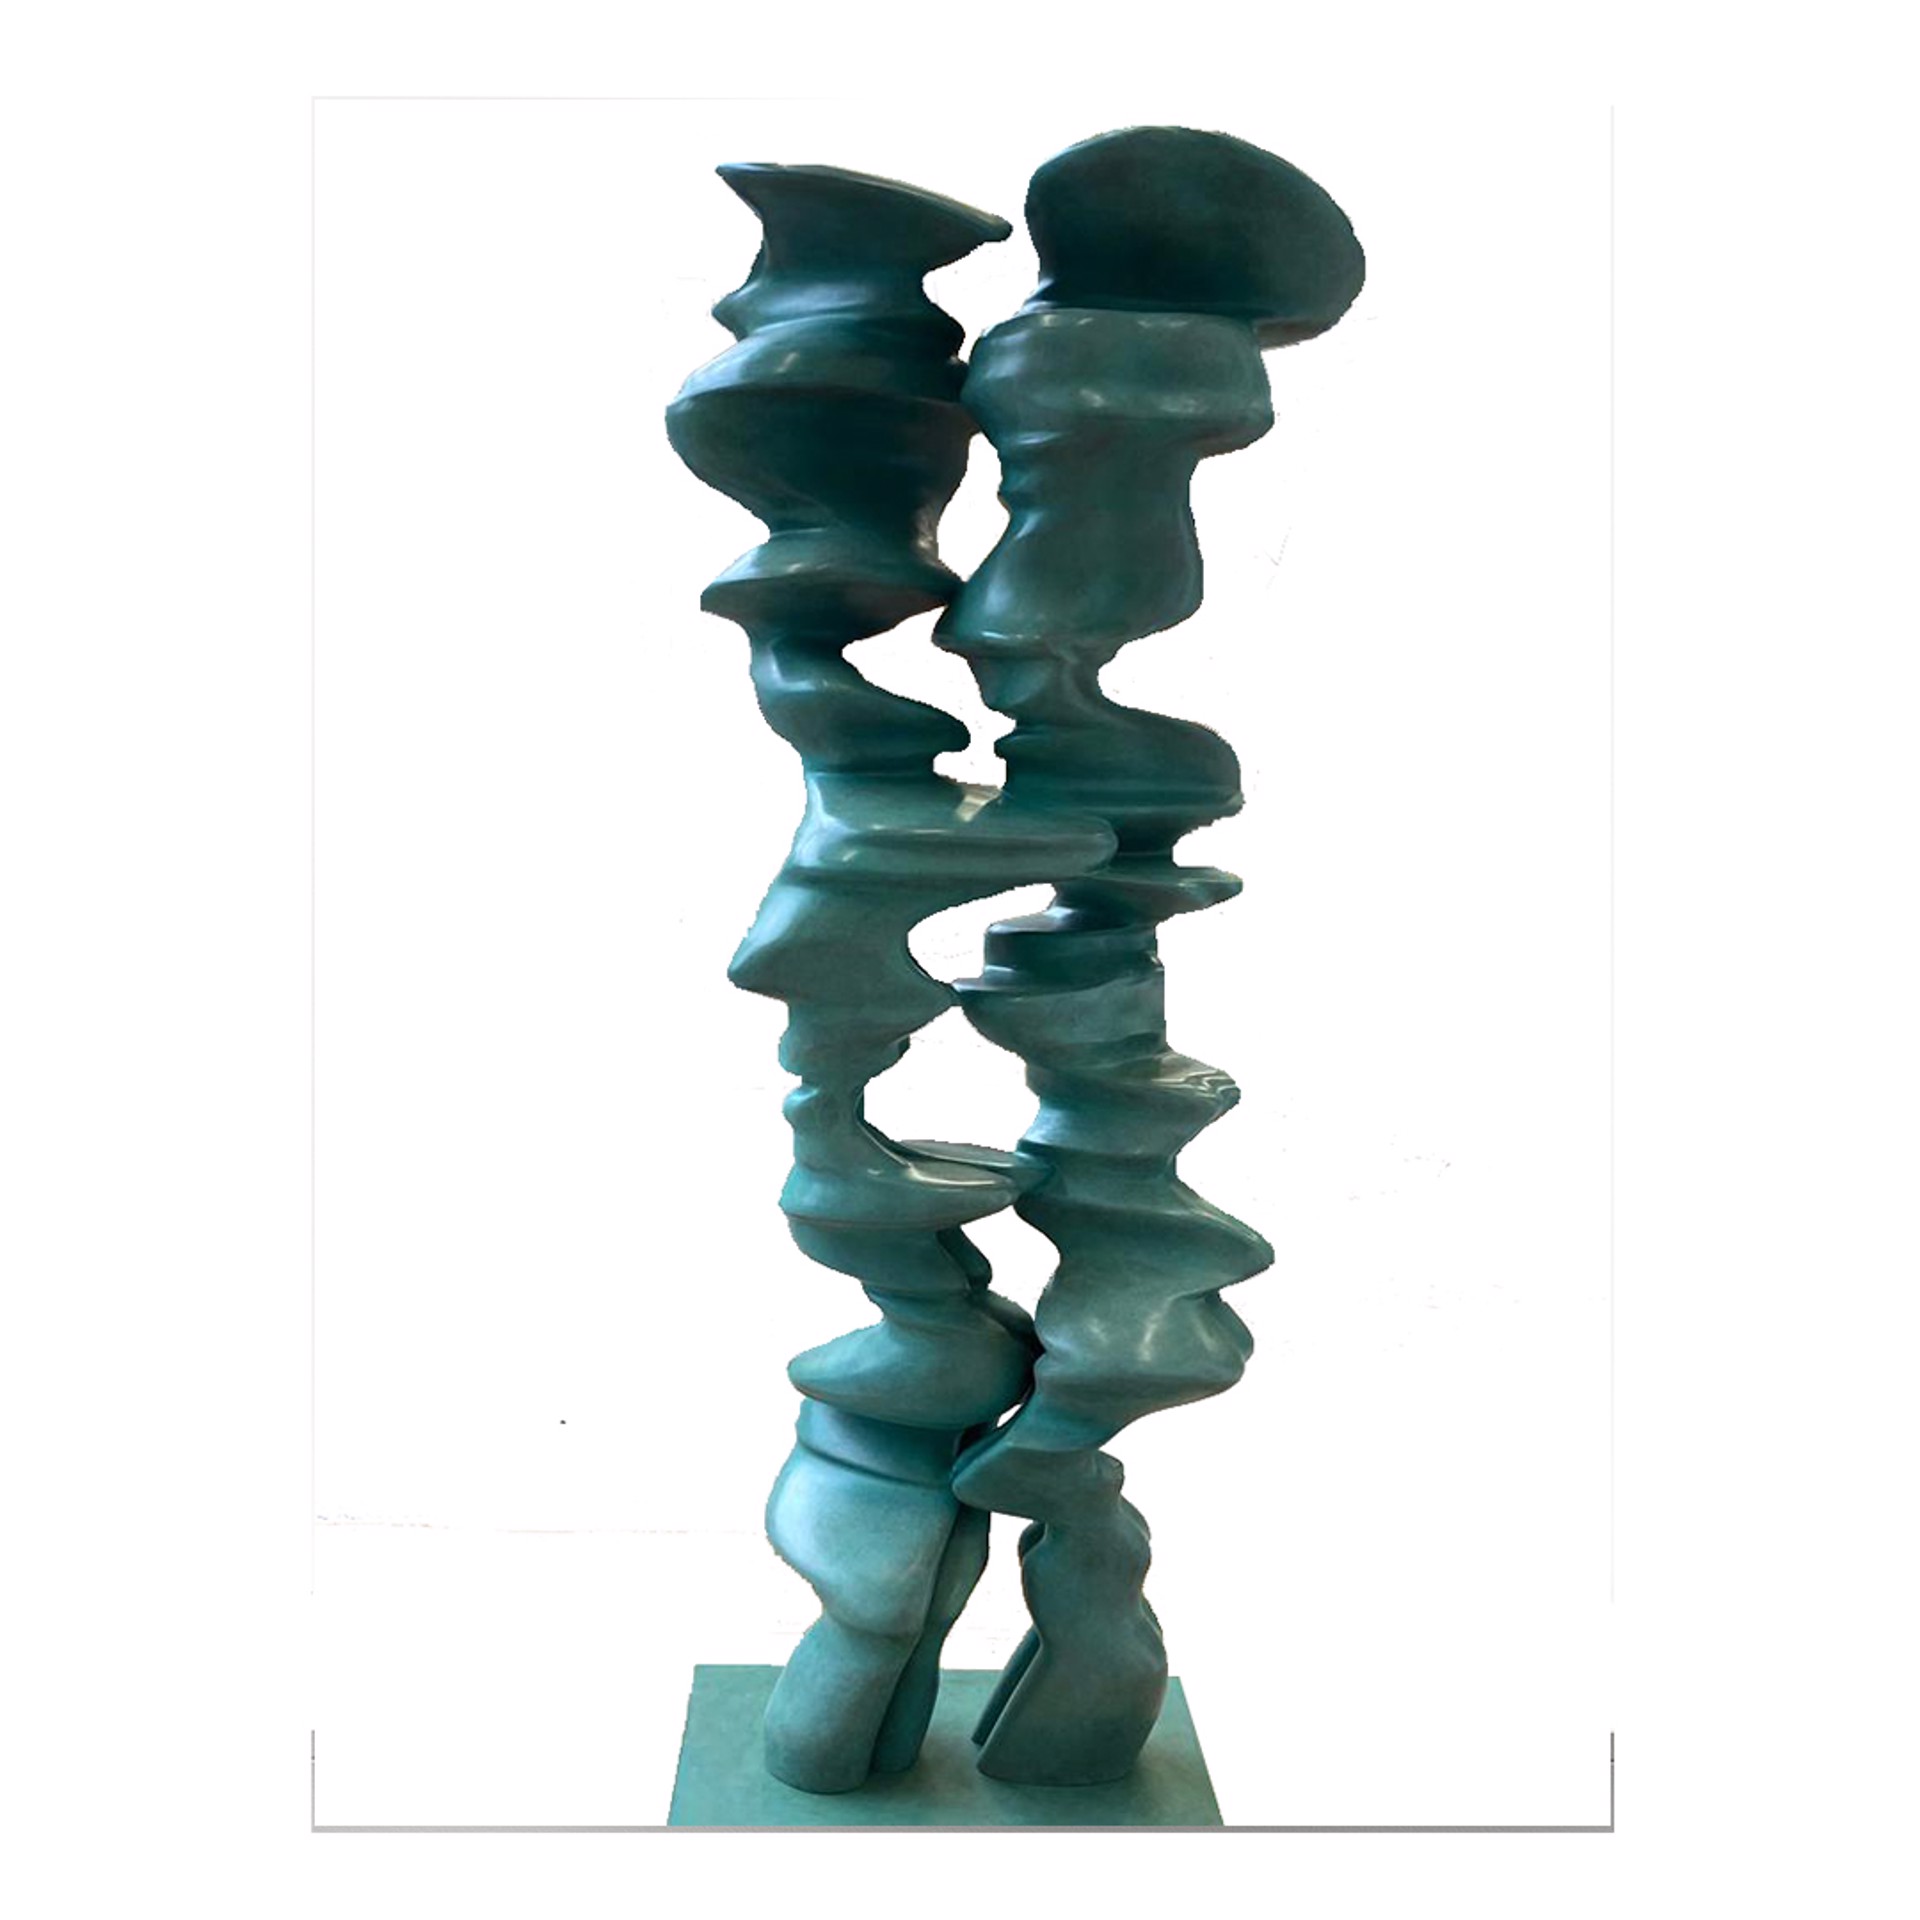 Untitled by Tony Cragg